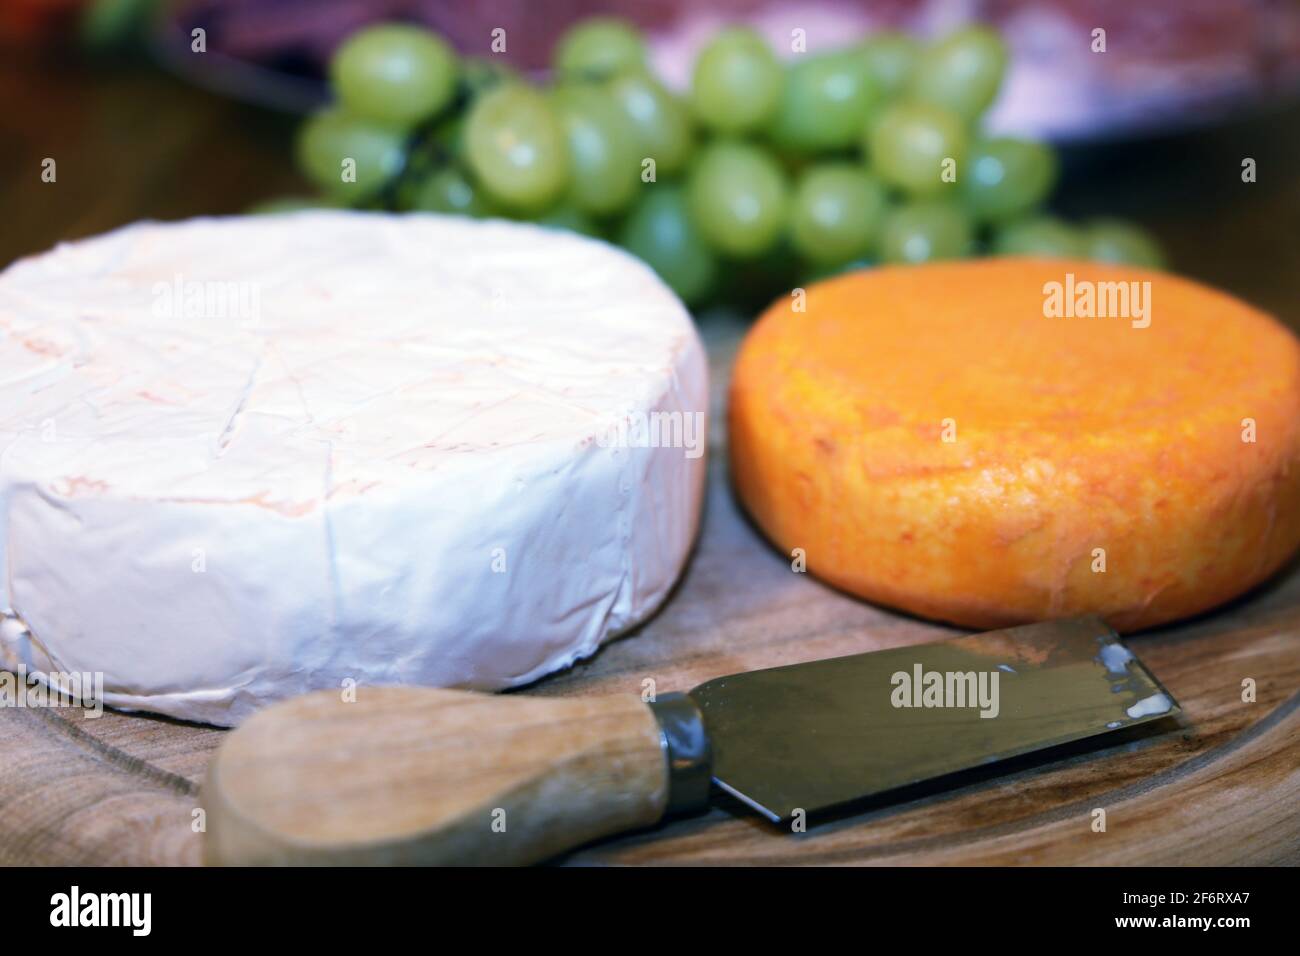 Cheese platter with different kinds of soft cheese and grapes. Stock Photo